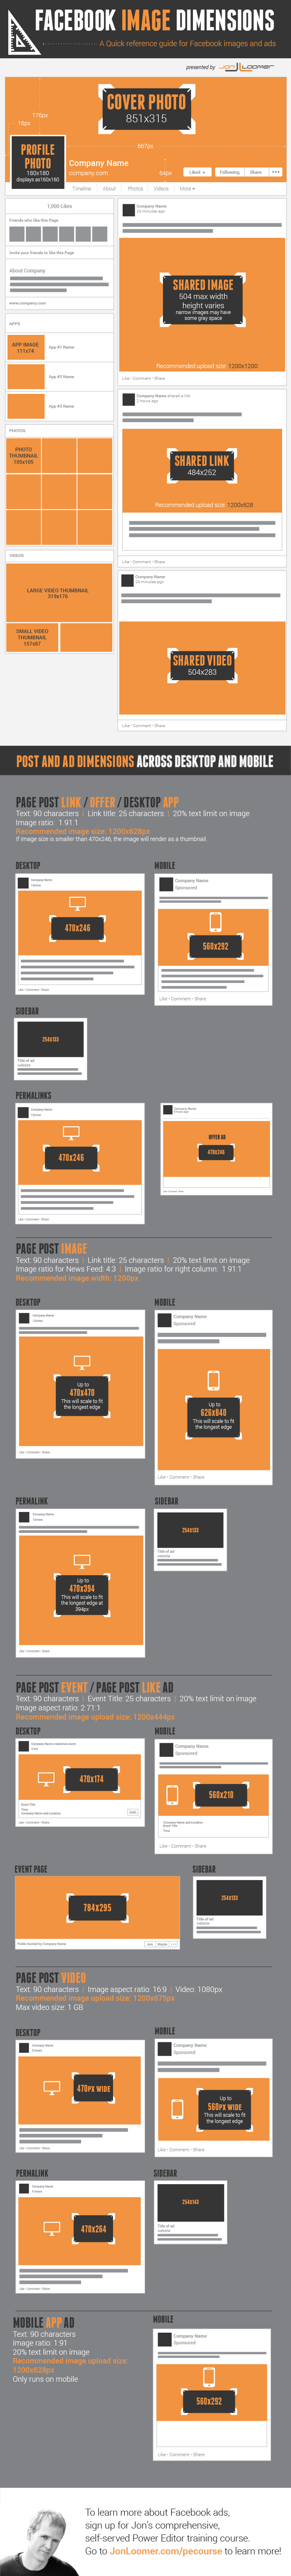 fb dimensions info sep All Facebook Image Dimensions: Timeline, Posts, Ads [Infographic]